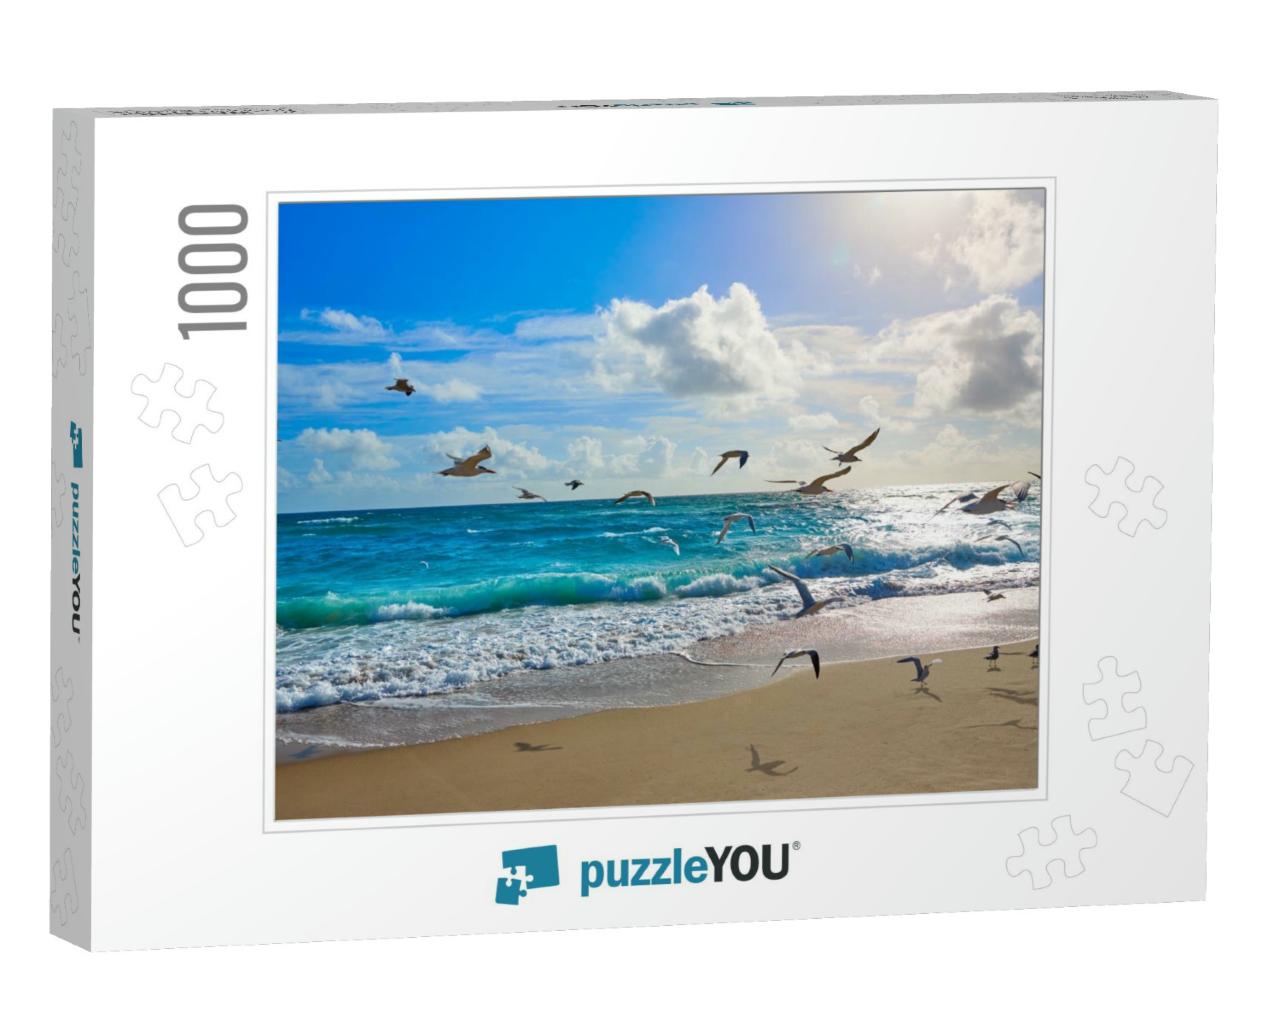 Singer Island Beach Seagulls At Palm Beach Florida in Usa... Jigsaw Puzzle with 1000 pieces